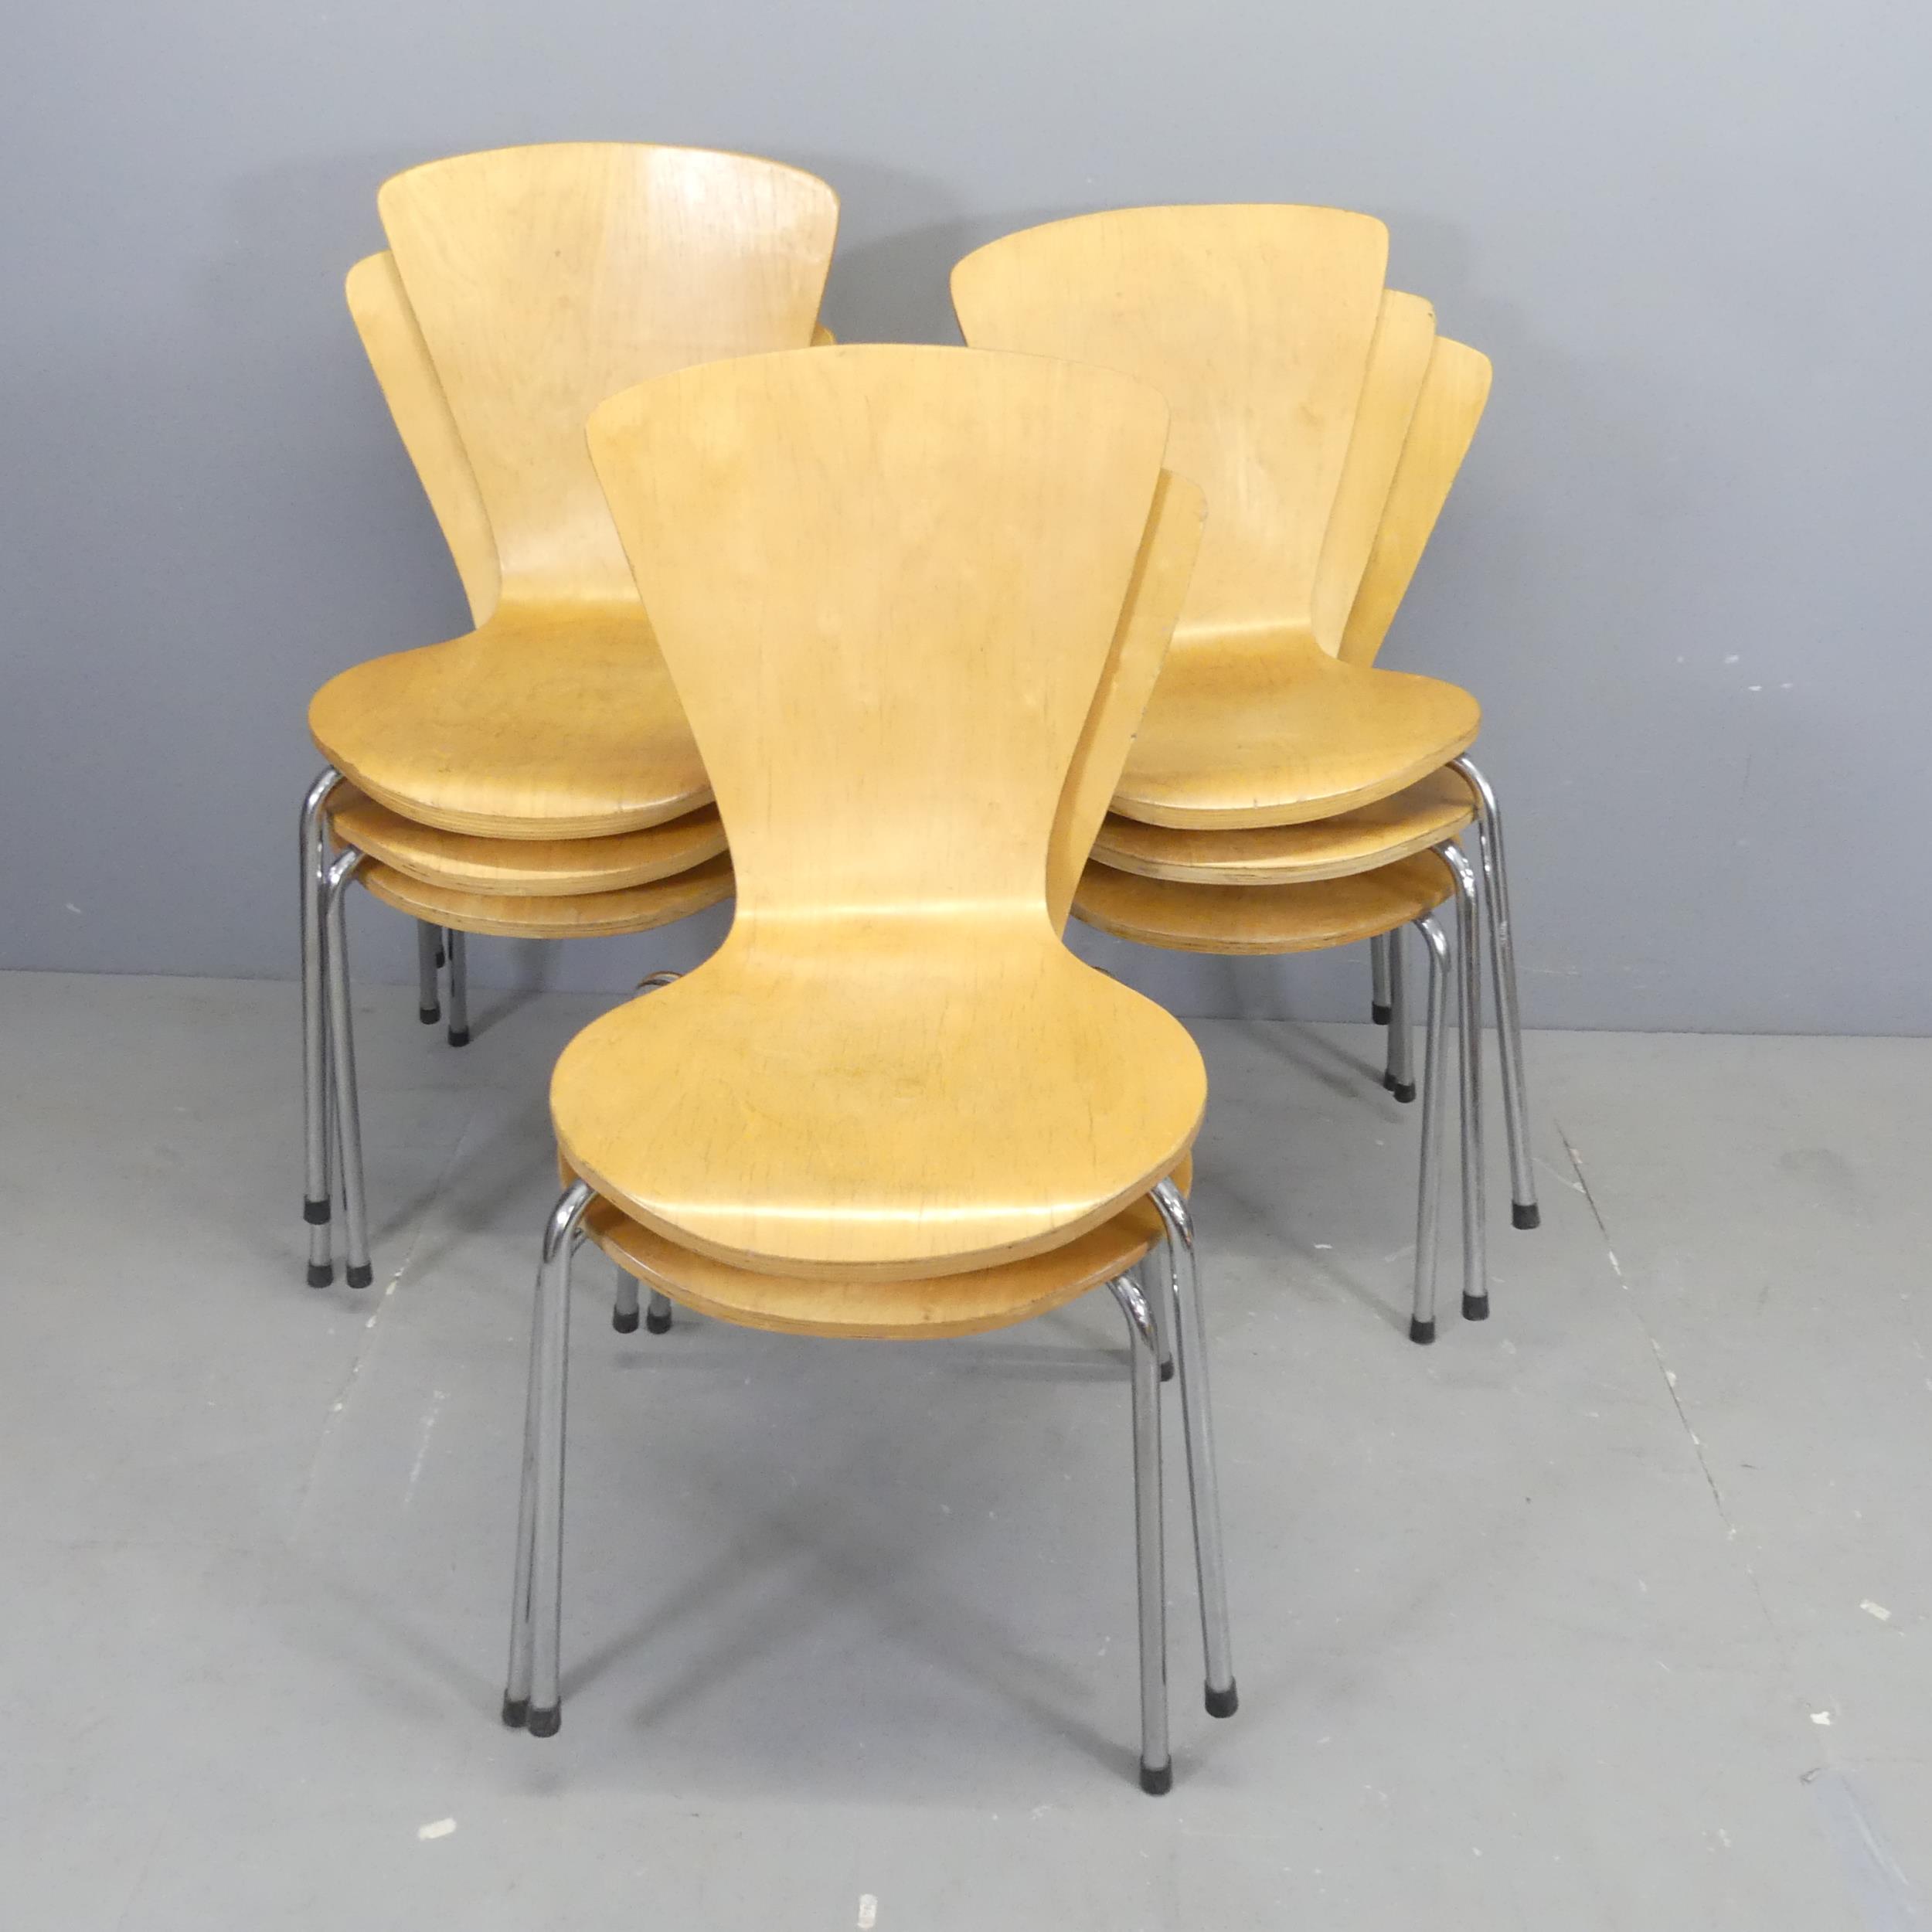 A set of eight contemporary bent ply stacking chairs.